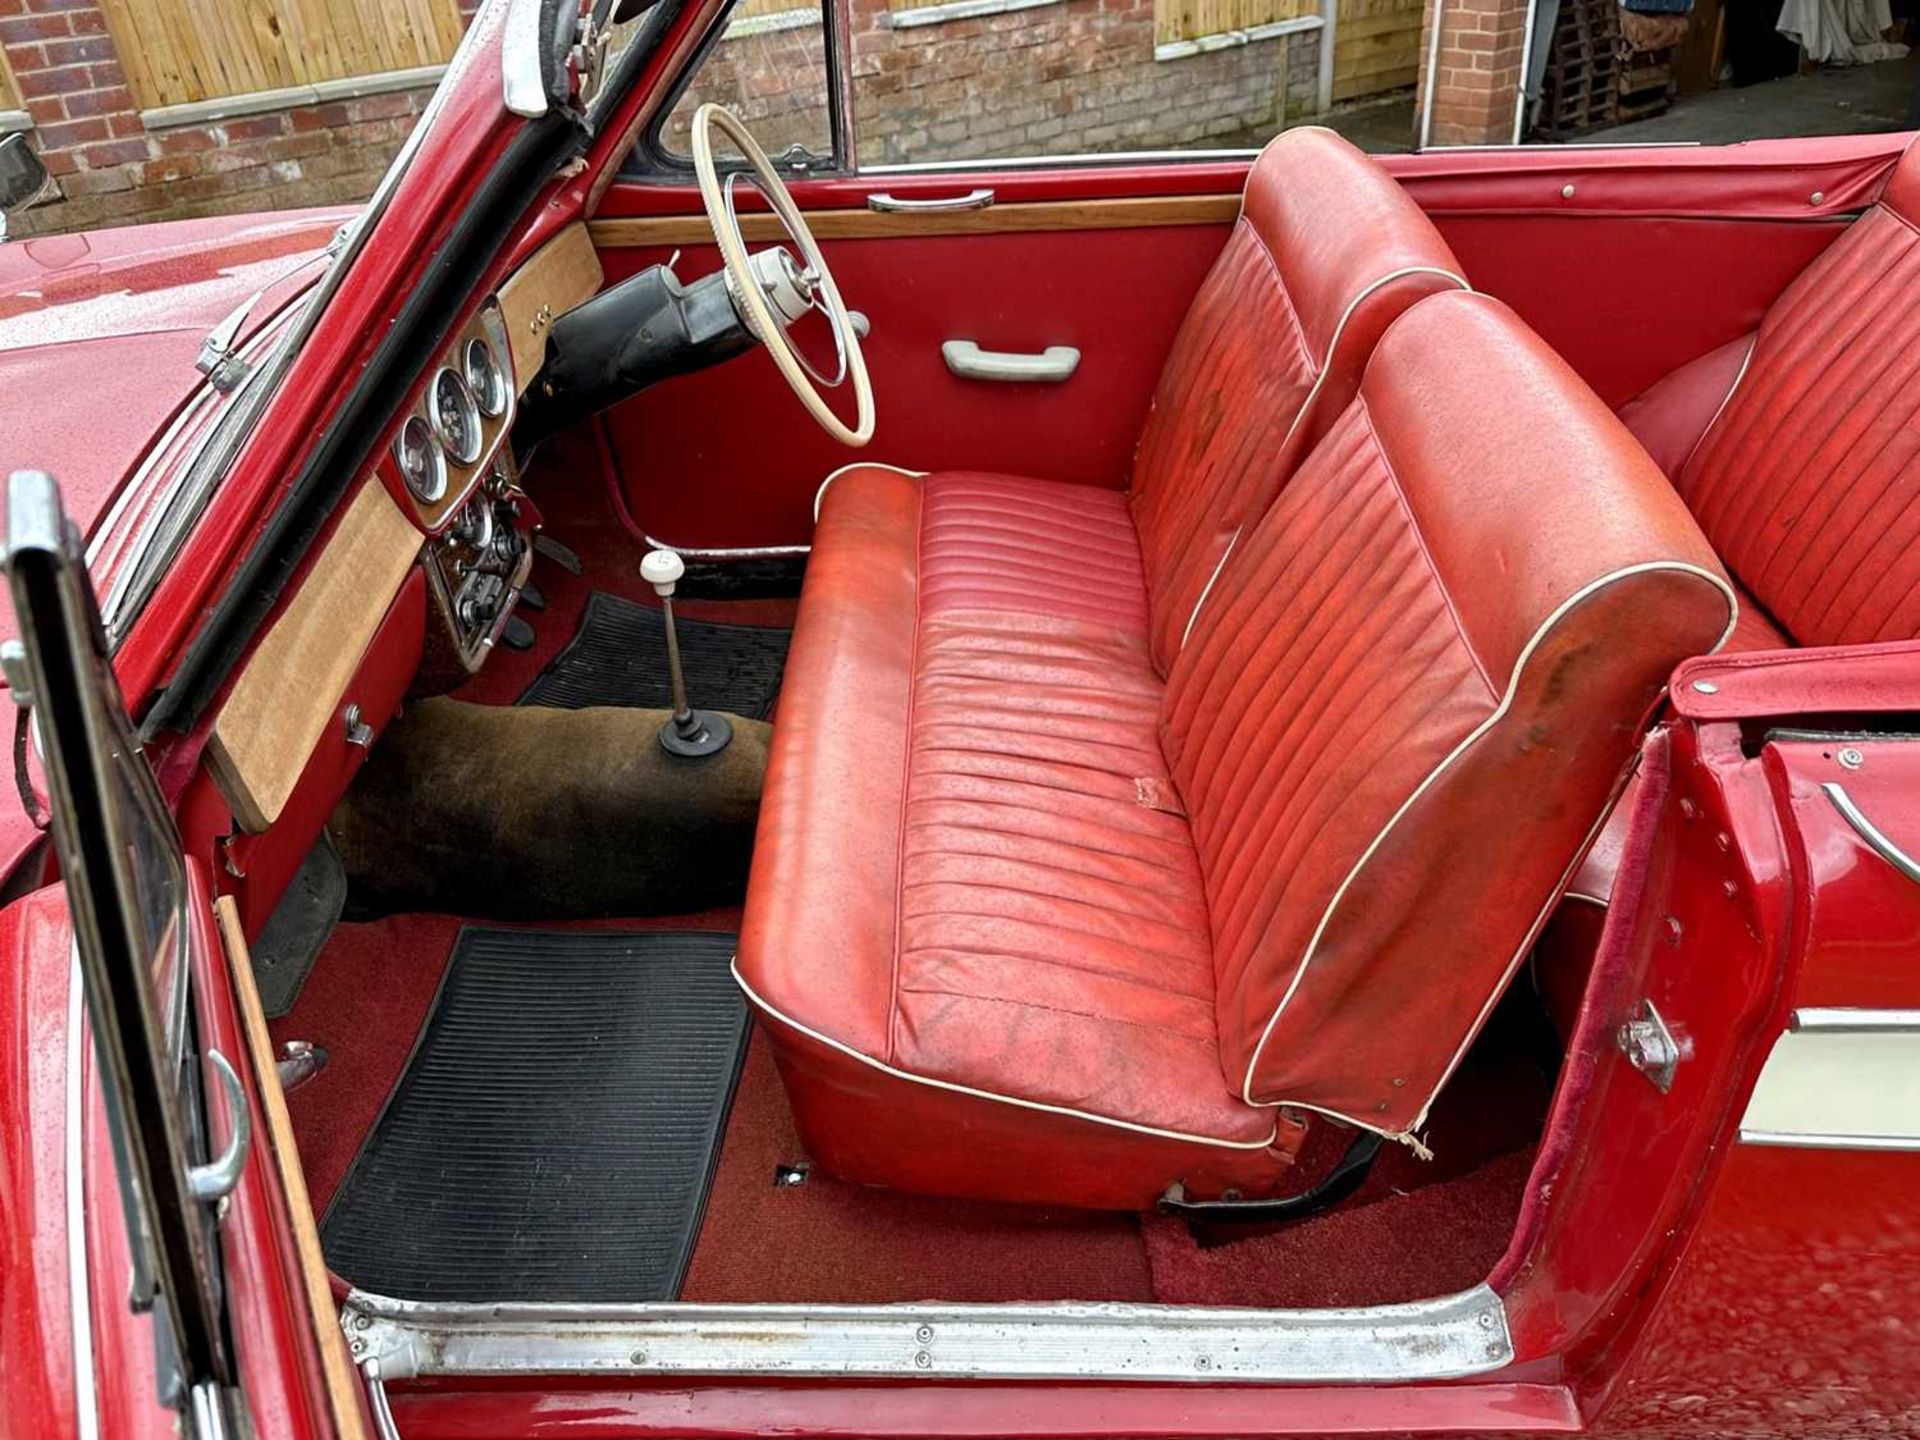 1961 Singer Gazelle Convertible Comes complete with overdrive, period radio and badge bar - Bild 46 aus 95